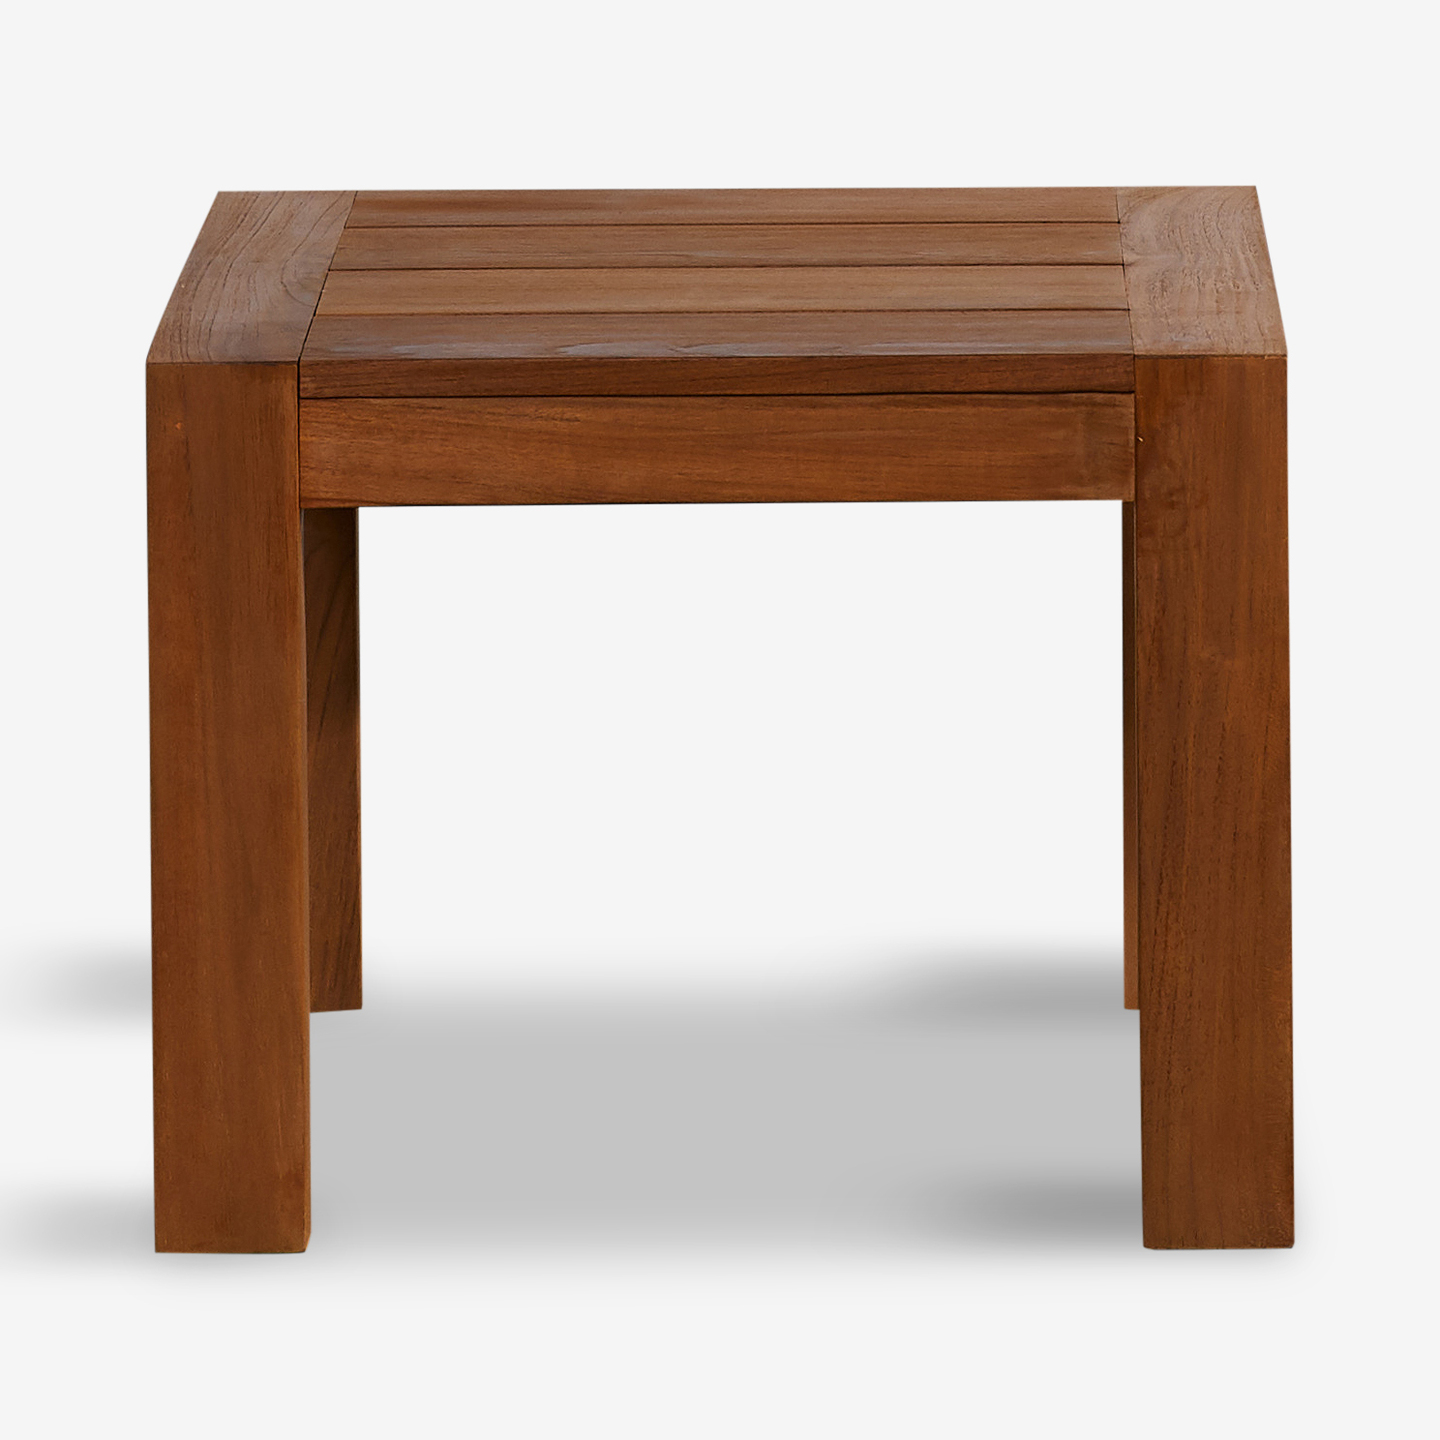 336_Del-Rey_path-Paticollectionso-Side-Table_Flat-Front 2020